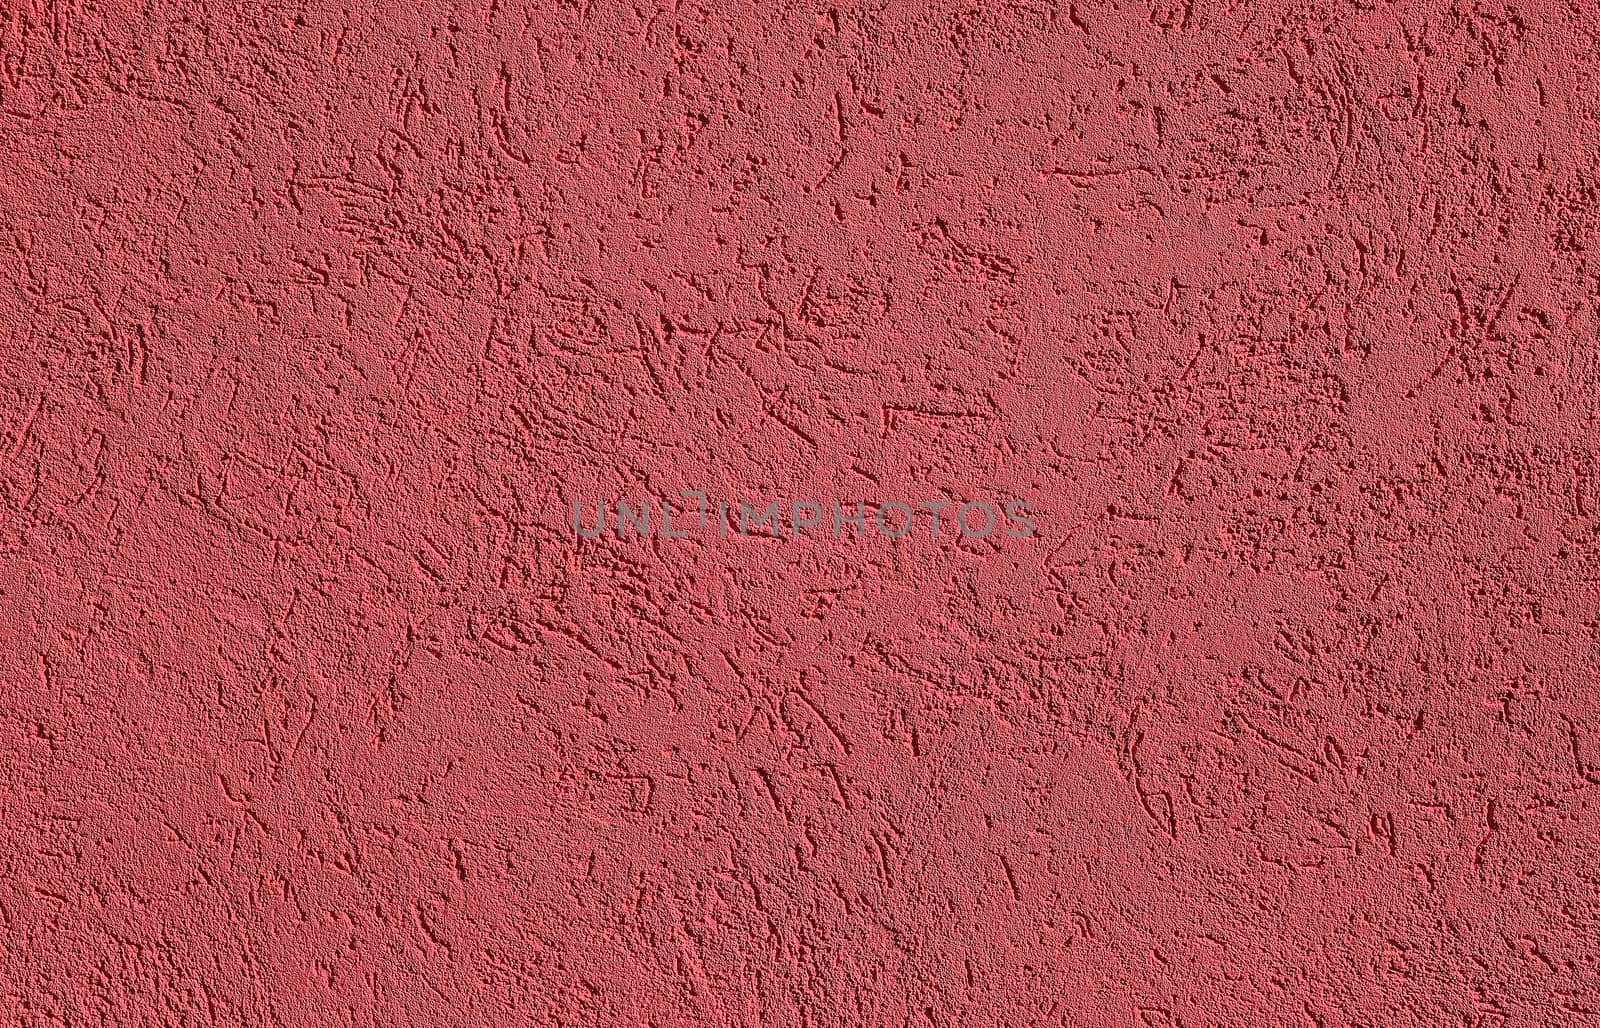 Burgundy red Textured cement or concrete wall background. Deep focus. Mock up or template for modern design.